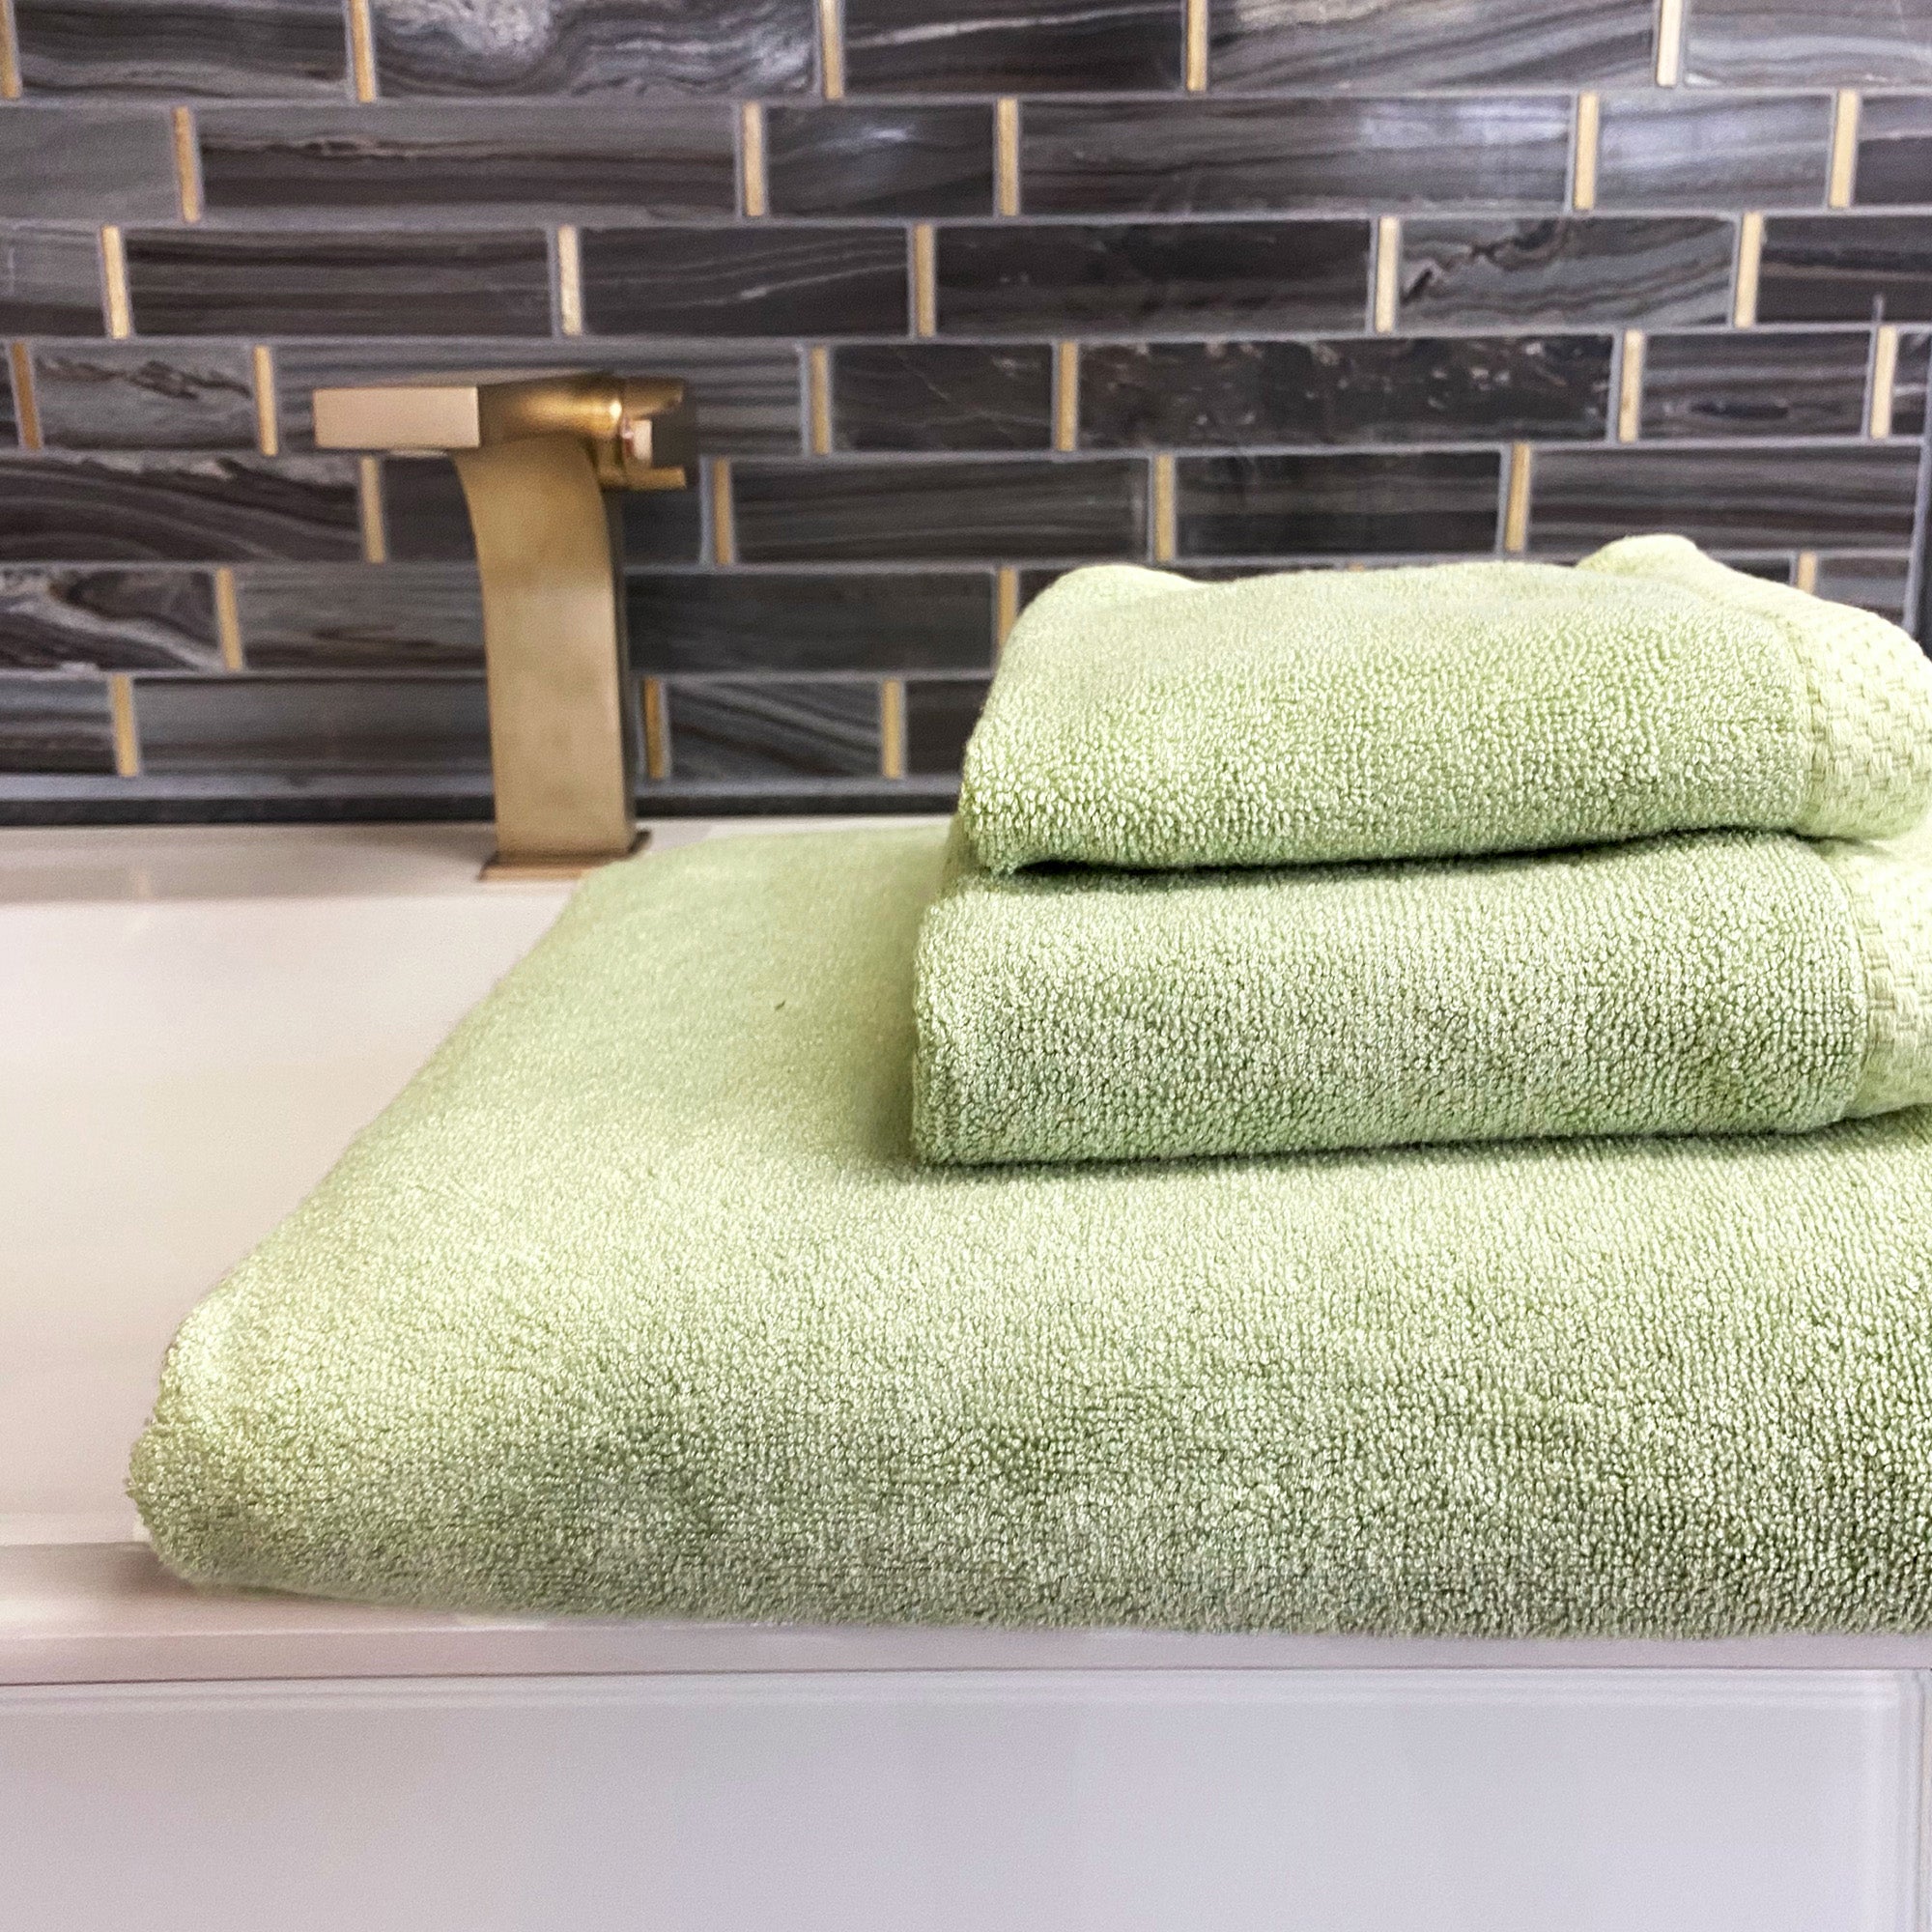 3piece set of sage green stacked bamboo towels sitting on bathroom counter